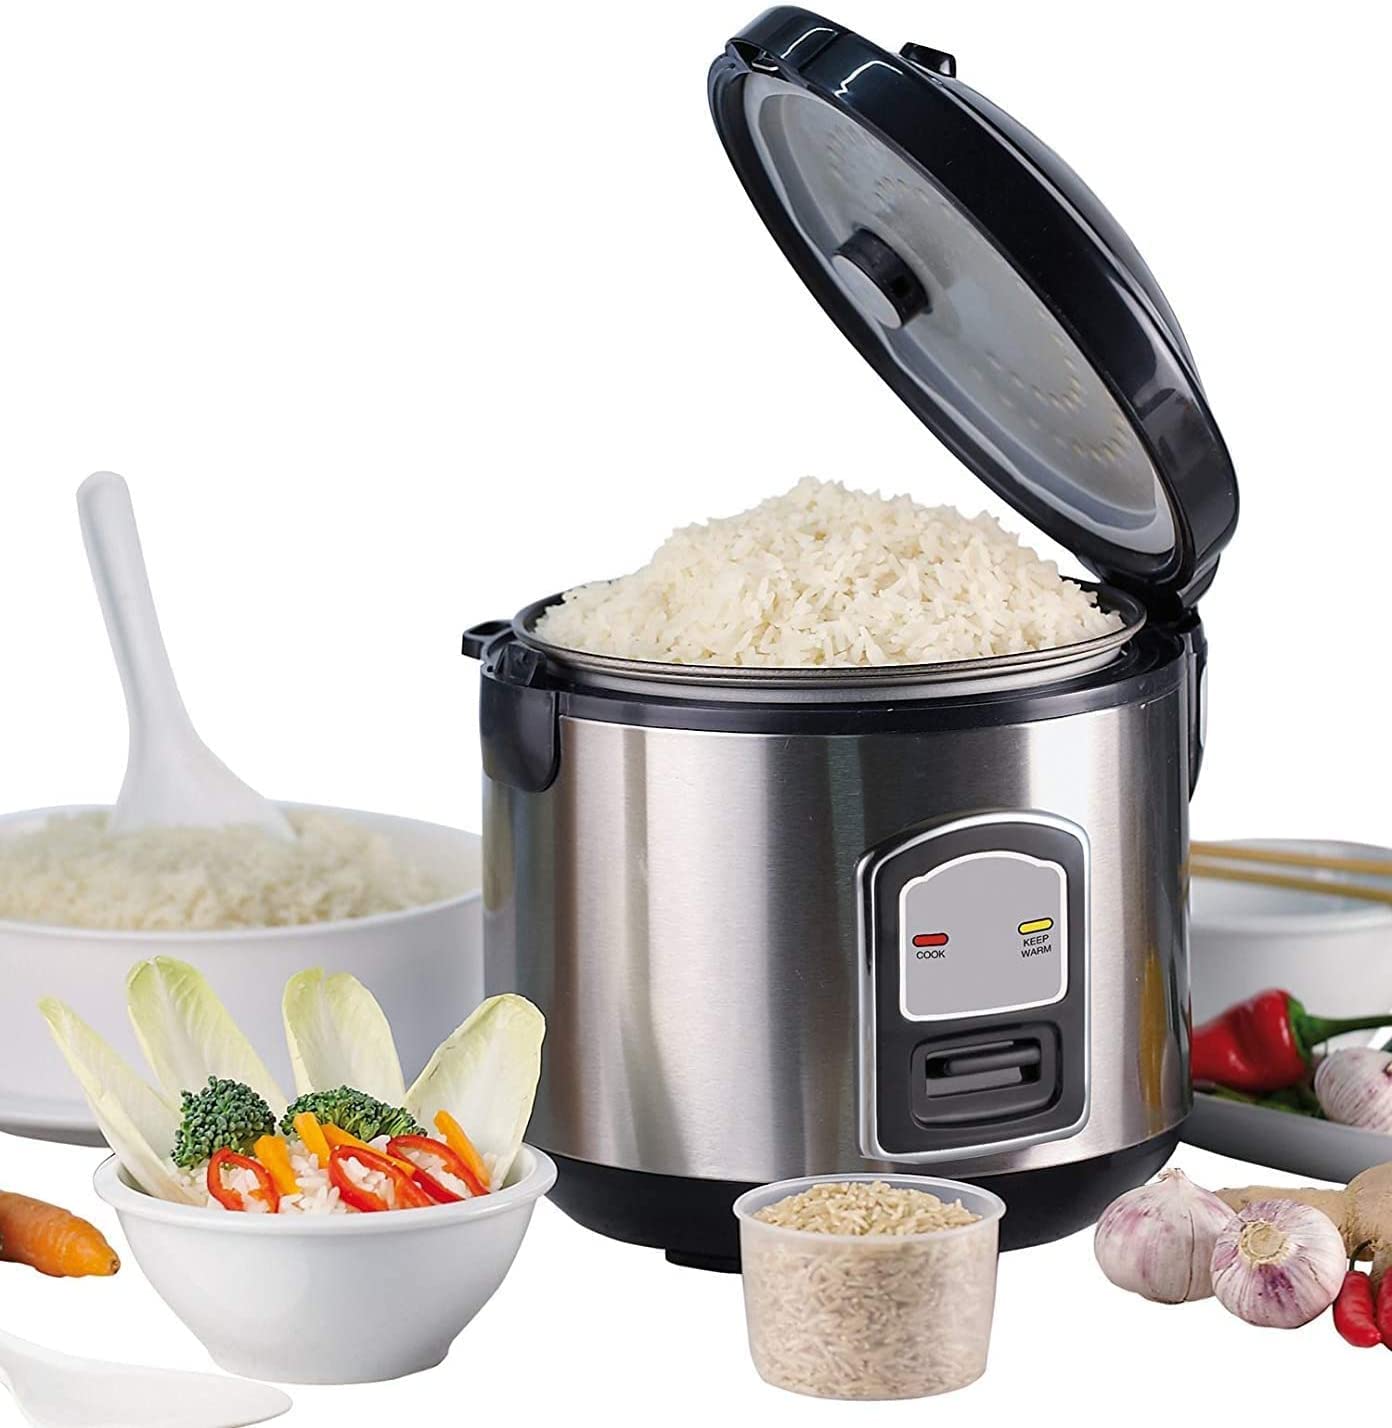 JUNG PerfectCook Stainless Steel Rice Cooker Small 3-in-1 Device - Rice Cooker Risotto Cooker Vegetable Cooker Multi Cooker 1.2 Litres Risotto Pot Steamer Insert Rice Pot for All Types of Travel